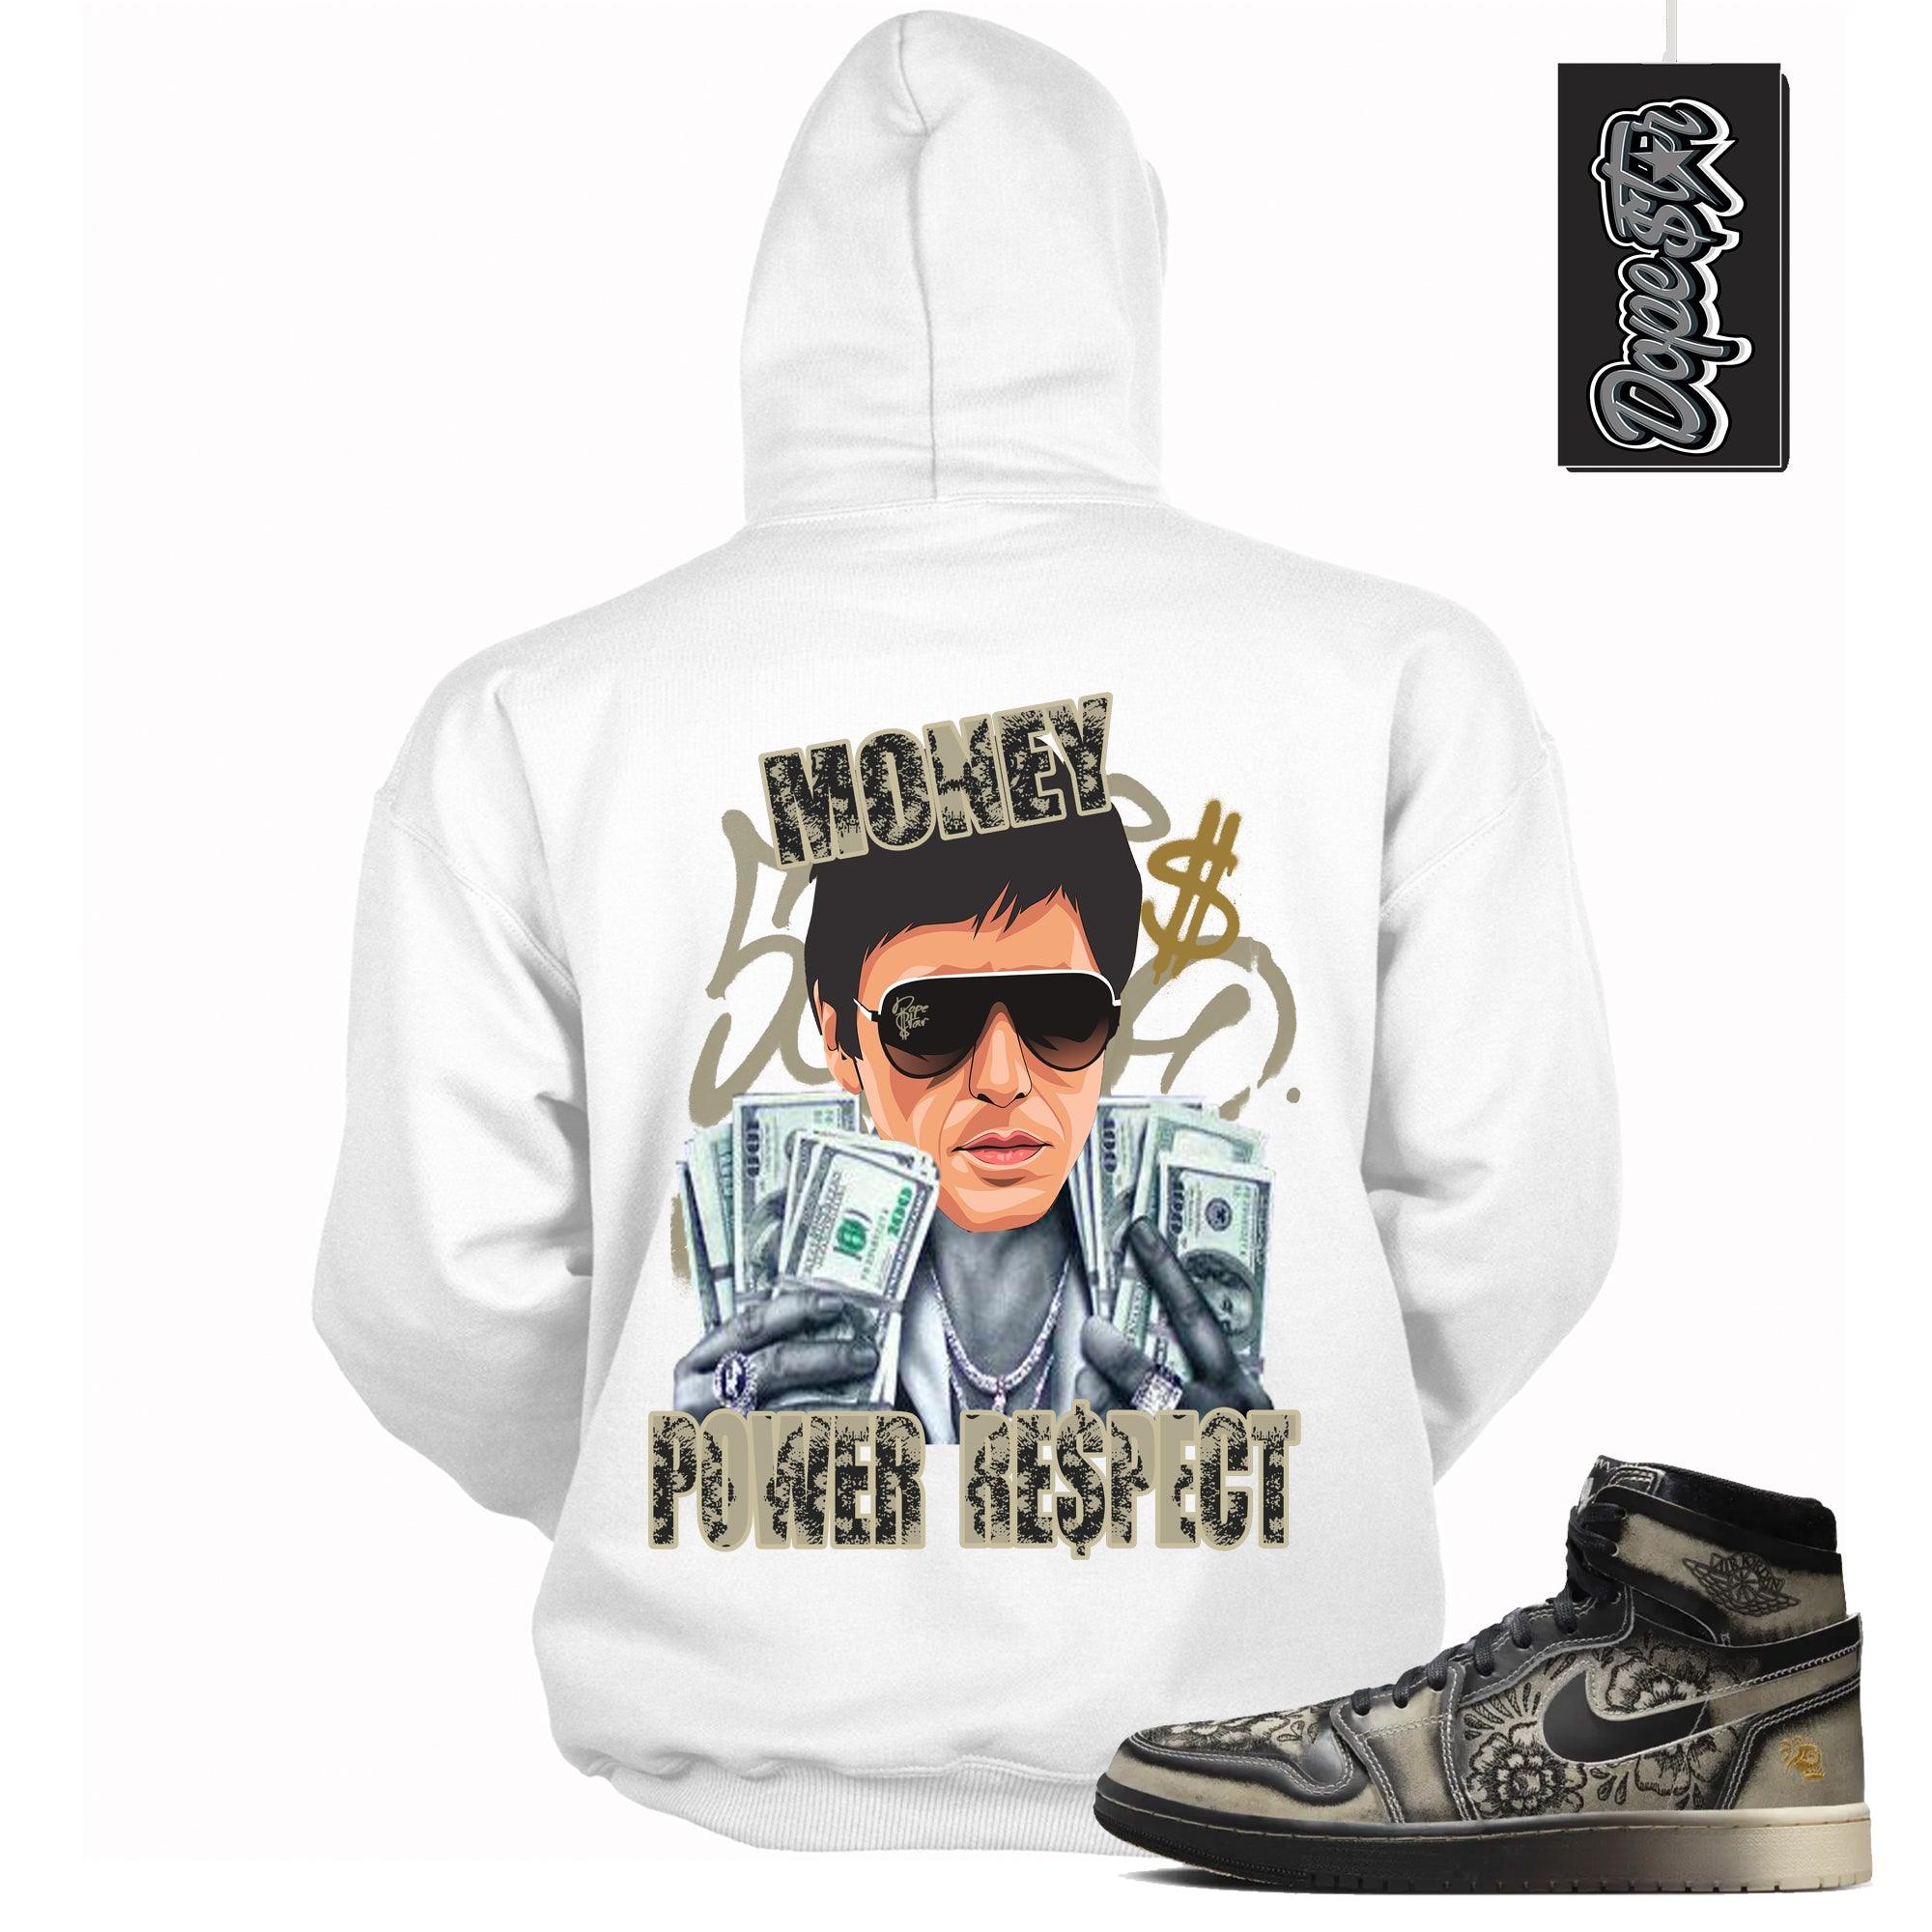 Cool White Graphic Hoodie with “ Tony Montana “ print, that perfectly matches Air Jordan 1 High Zoom Comfort 2 Dia de Muertos Black and Pale Ivory sneakers